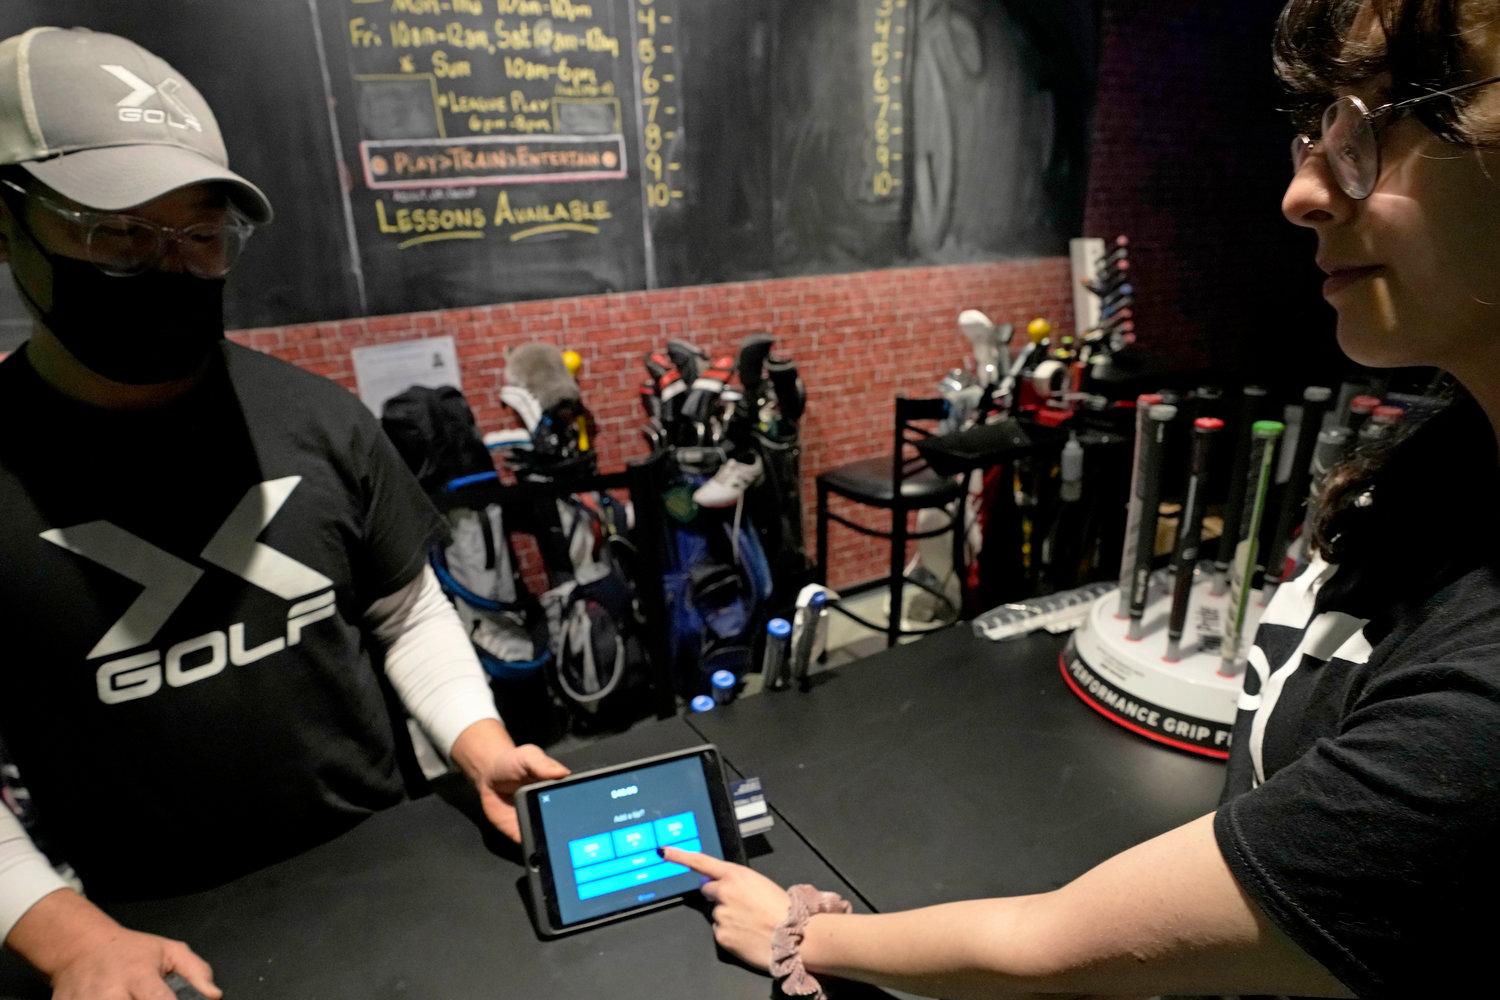 X-Golf manager J.W. Park, left, helps Ashley Moreno to check out at X-Golf indoor golf in Glenview, Ill., Friday, Jan. 20, 2023. Tipping fatigue, it seems, is swarming America as more businesses adopt digital payment methods that automatically prompts customers to leave a gratuity.